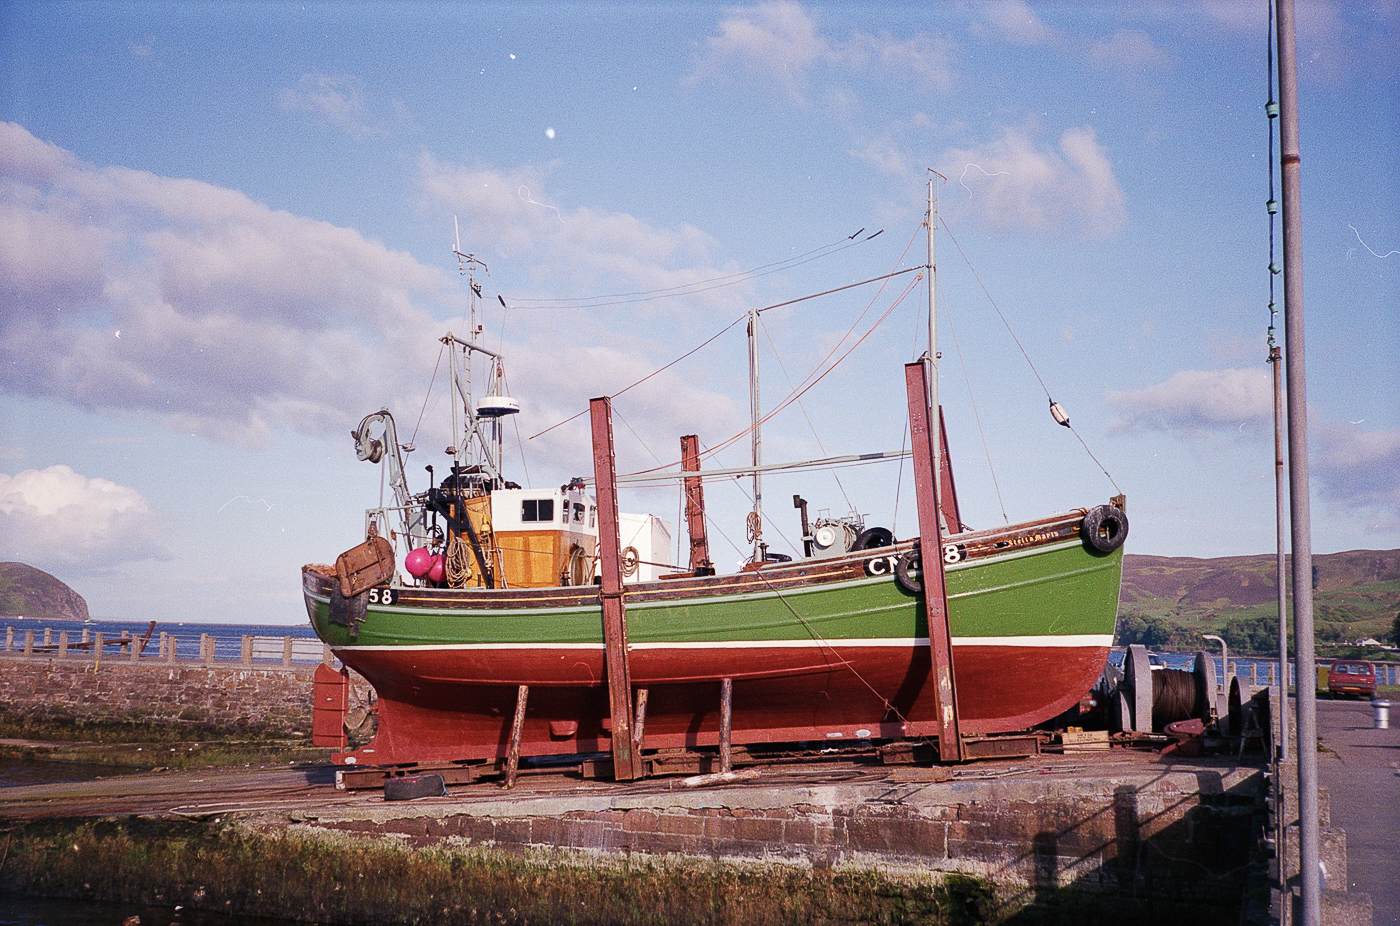 Dual purpose ringnetter and trawler, 'Stella Maris', CN158, Campbeltown, May 1989. She was built in Port Seton in 1959 and, prior to this photograph, had been name d and registered 'Watchful' and 'Majestic', SY137. In 1984, she was bought by Skipper Denis Meenan of Campbeltown. in 1985, he presented the ringnet winch from this boat to the Scottish Fisheries Museum.